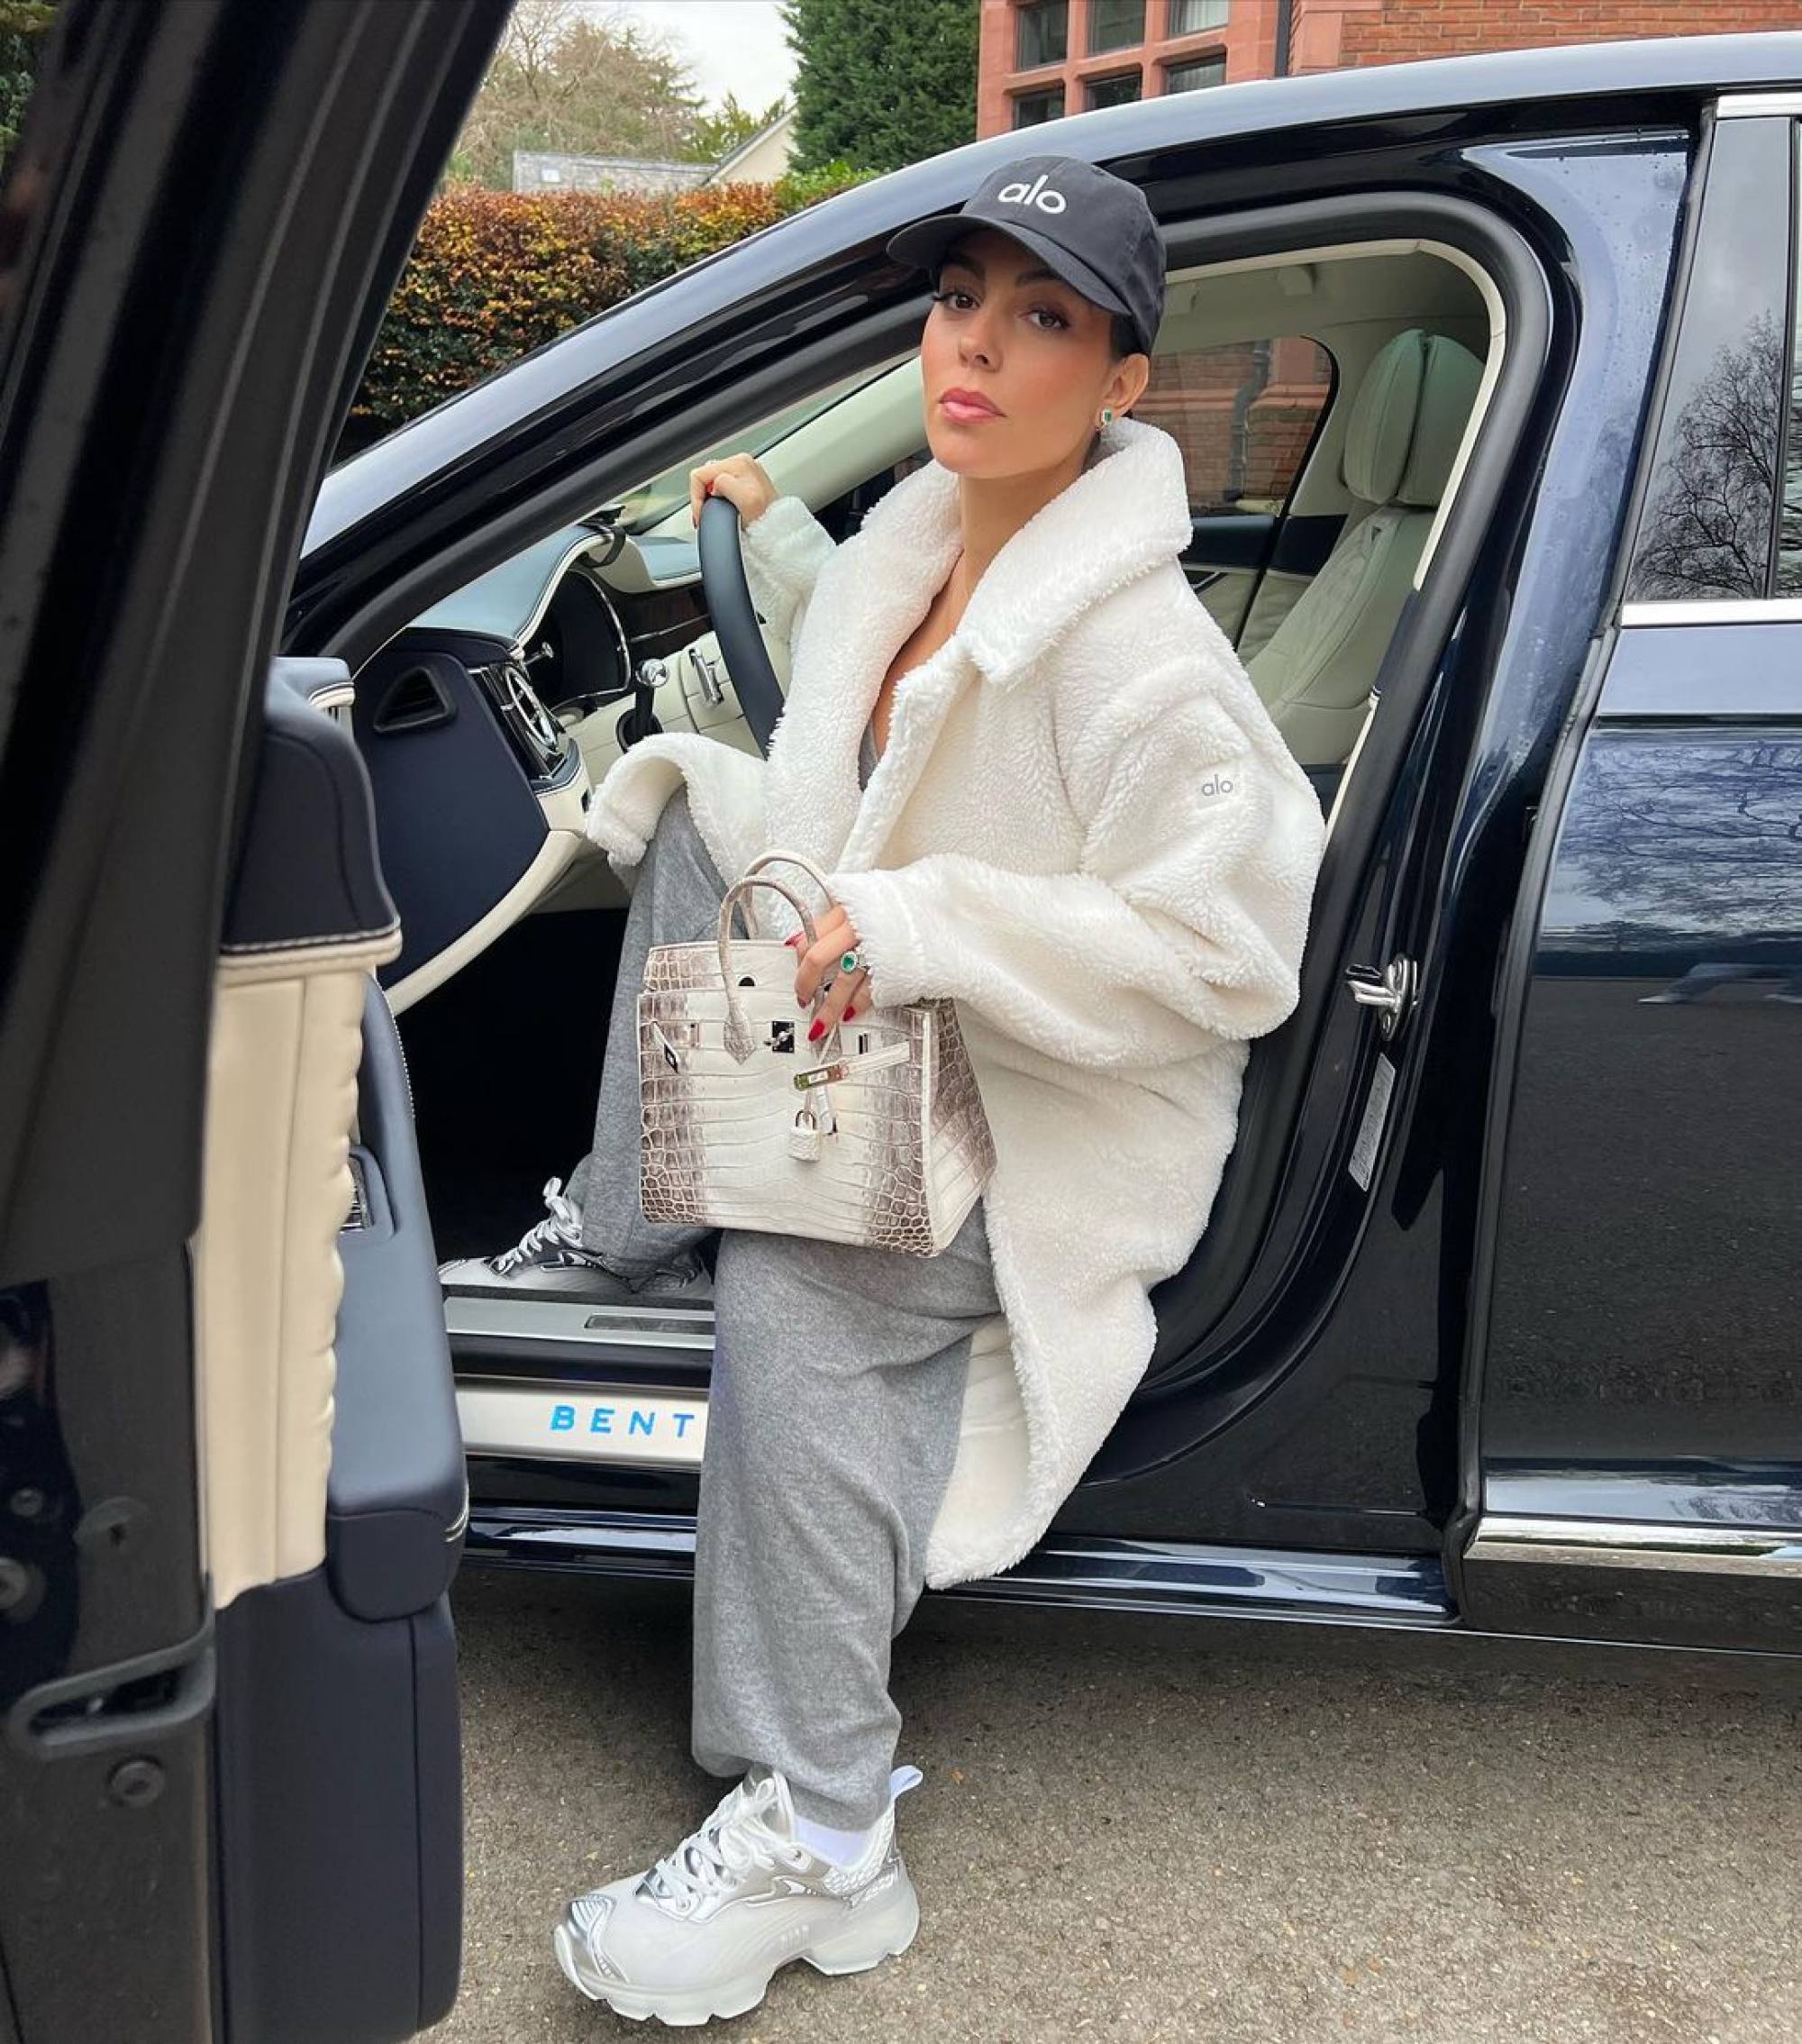 5 of Georgina Rodríguez's most enviable Hermès bags: Cristiano Ronaldo's  model girlfriend rocks rare Himalaya, Crocodile and Ostrich Birkins and  dainty Kelly bags with casual and chic looks alike